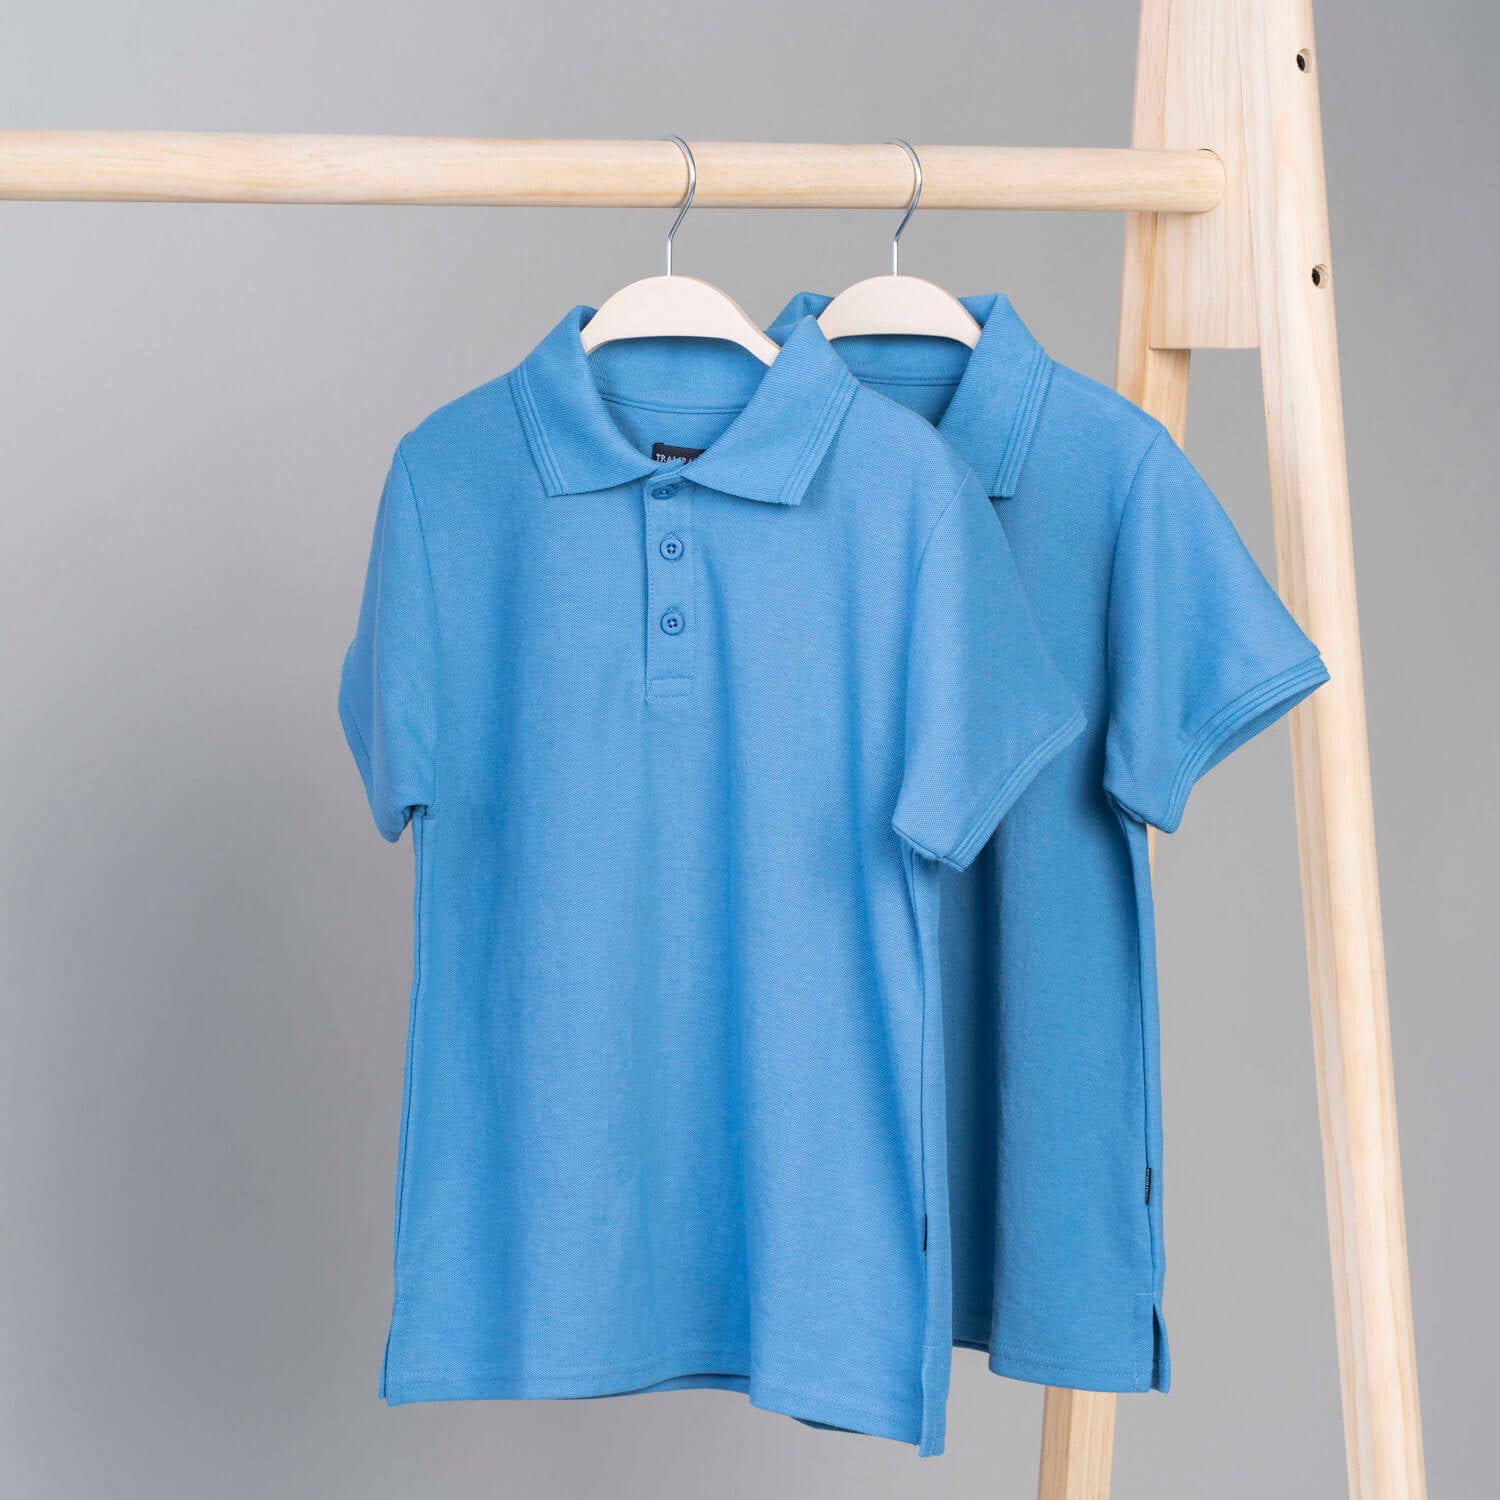 Skippy Short-Sleeve Polo Top 2 Pack 1 Shaws Department Stores